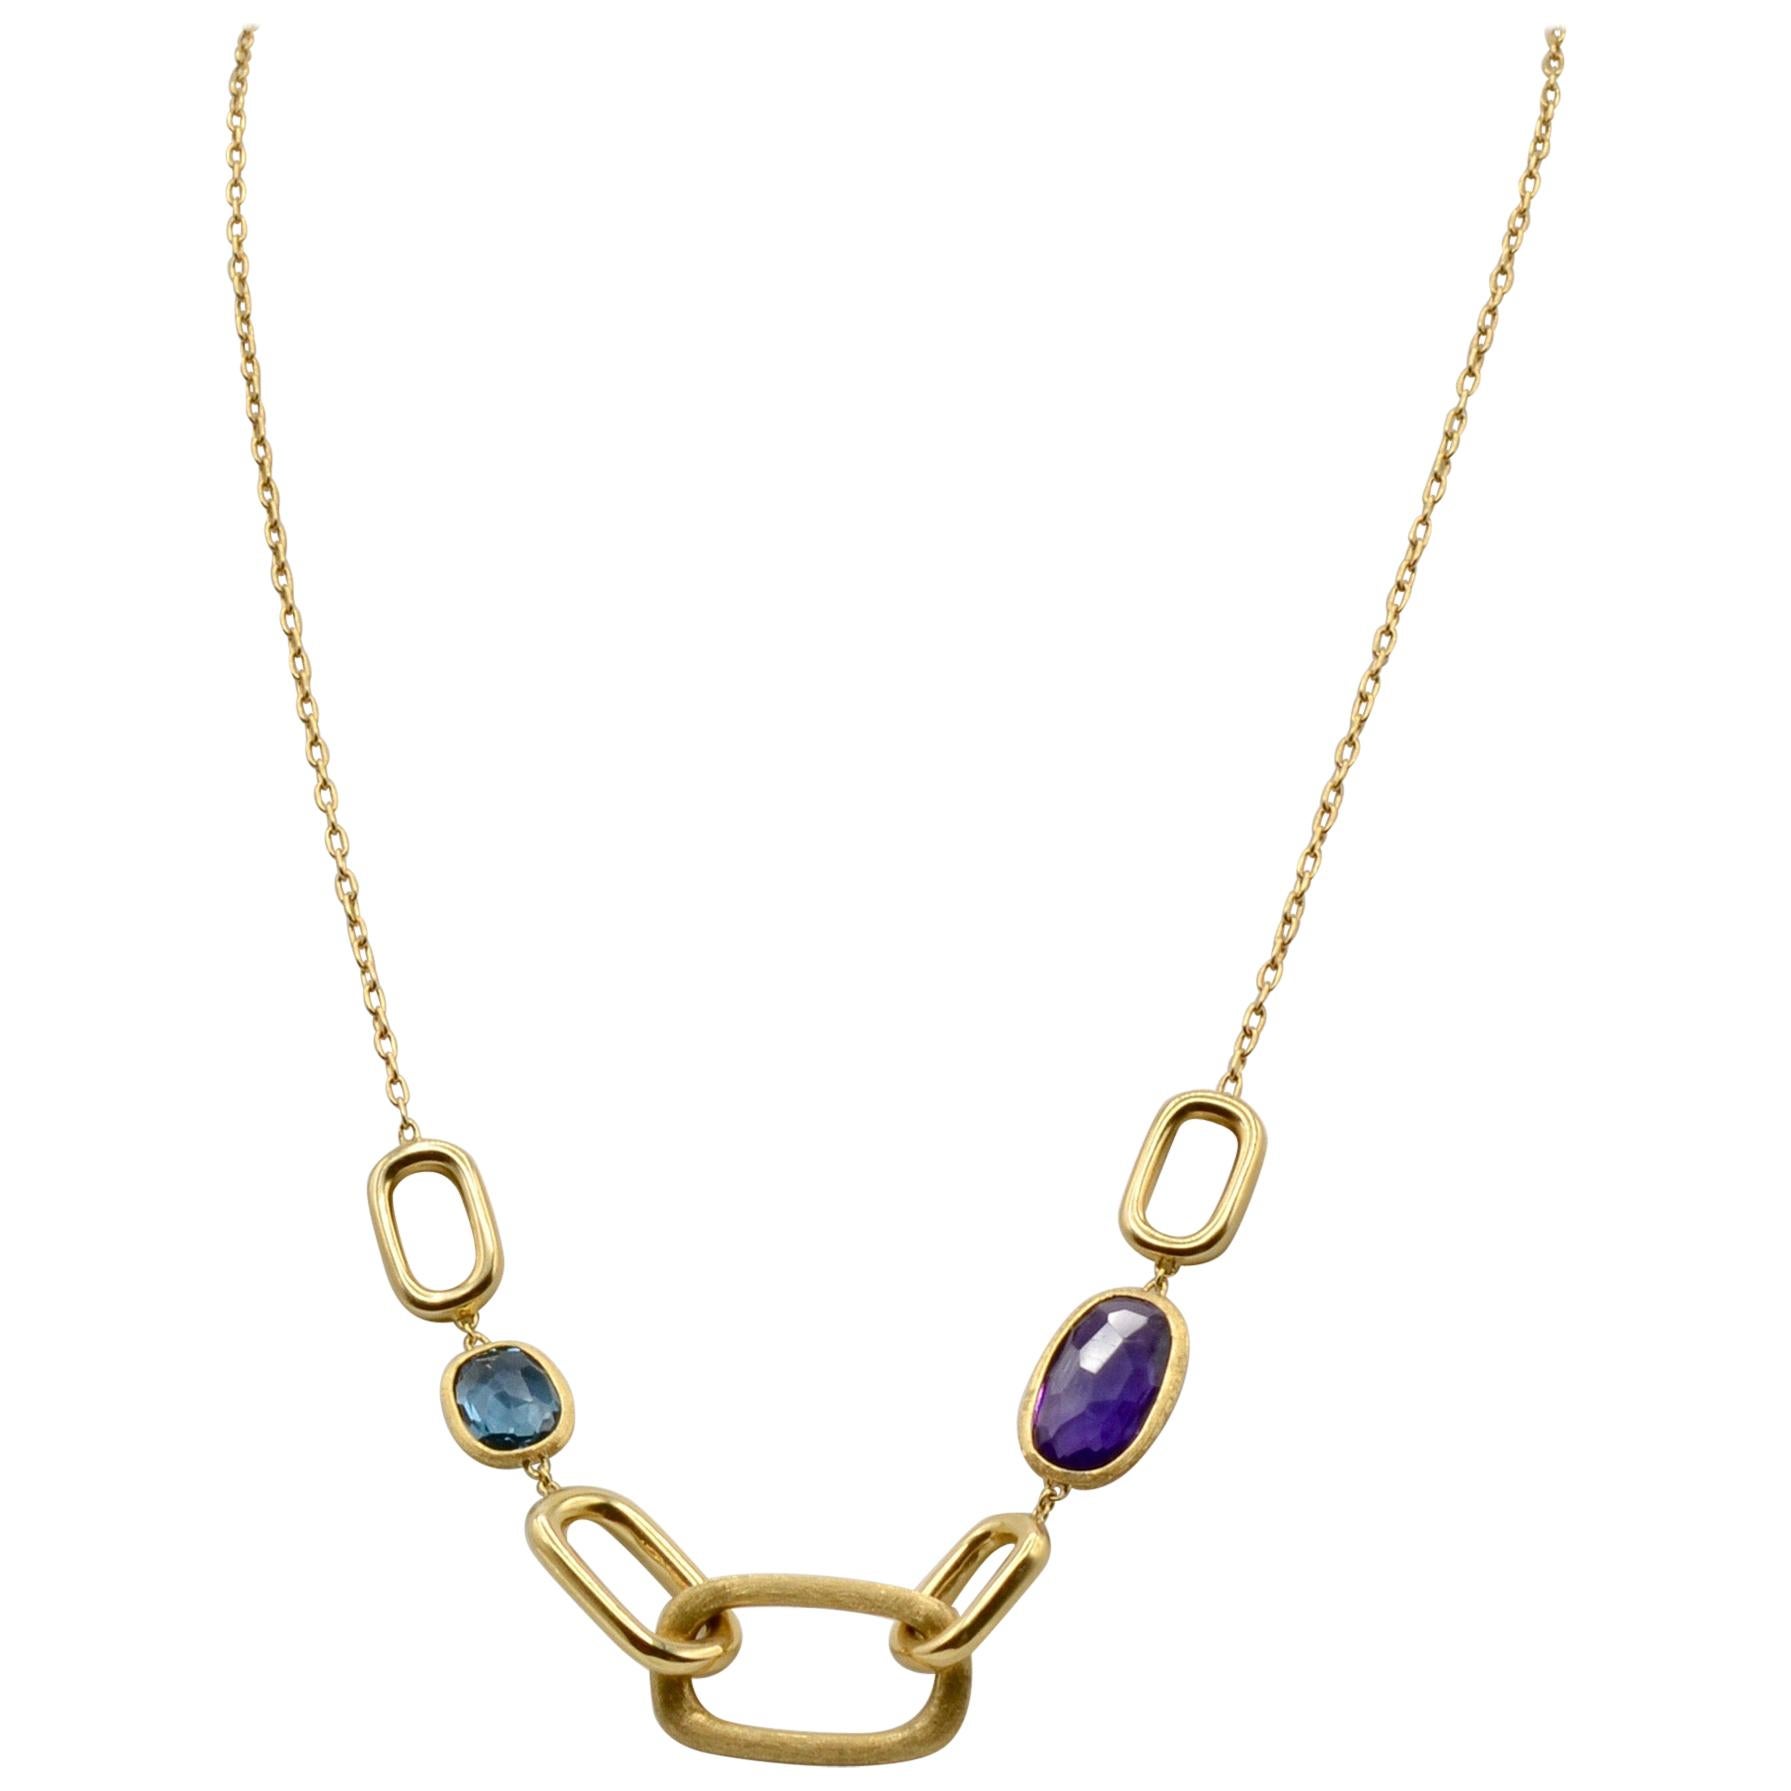 Marco Bicego 18 Karat Gold Necklace Murano Link Amethyst and Blue Topaz